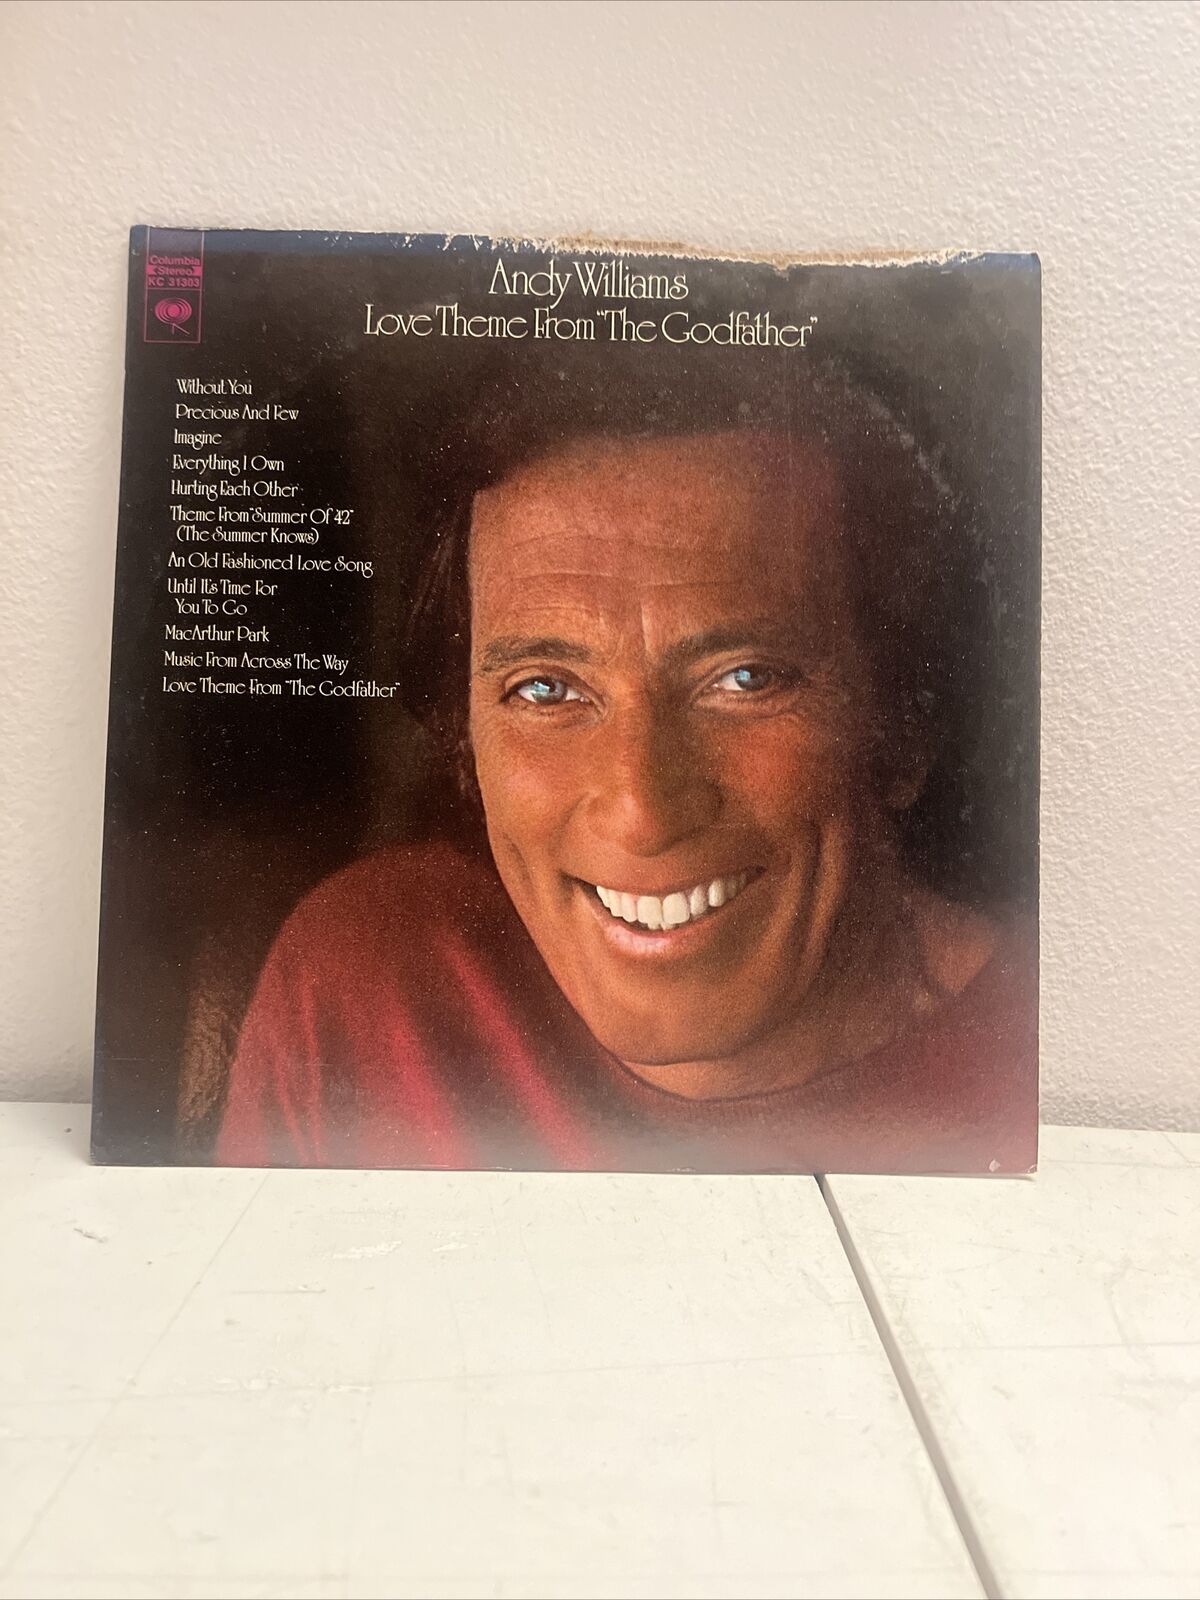 Andy Williams Album Vinyl 1972 Columbia Love Theme From The Godfather. Original